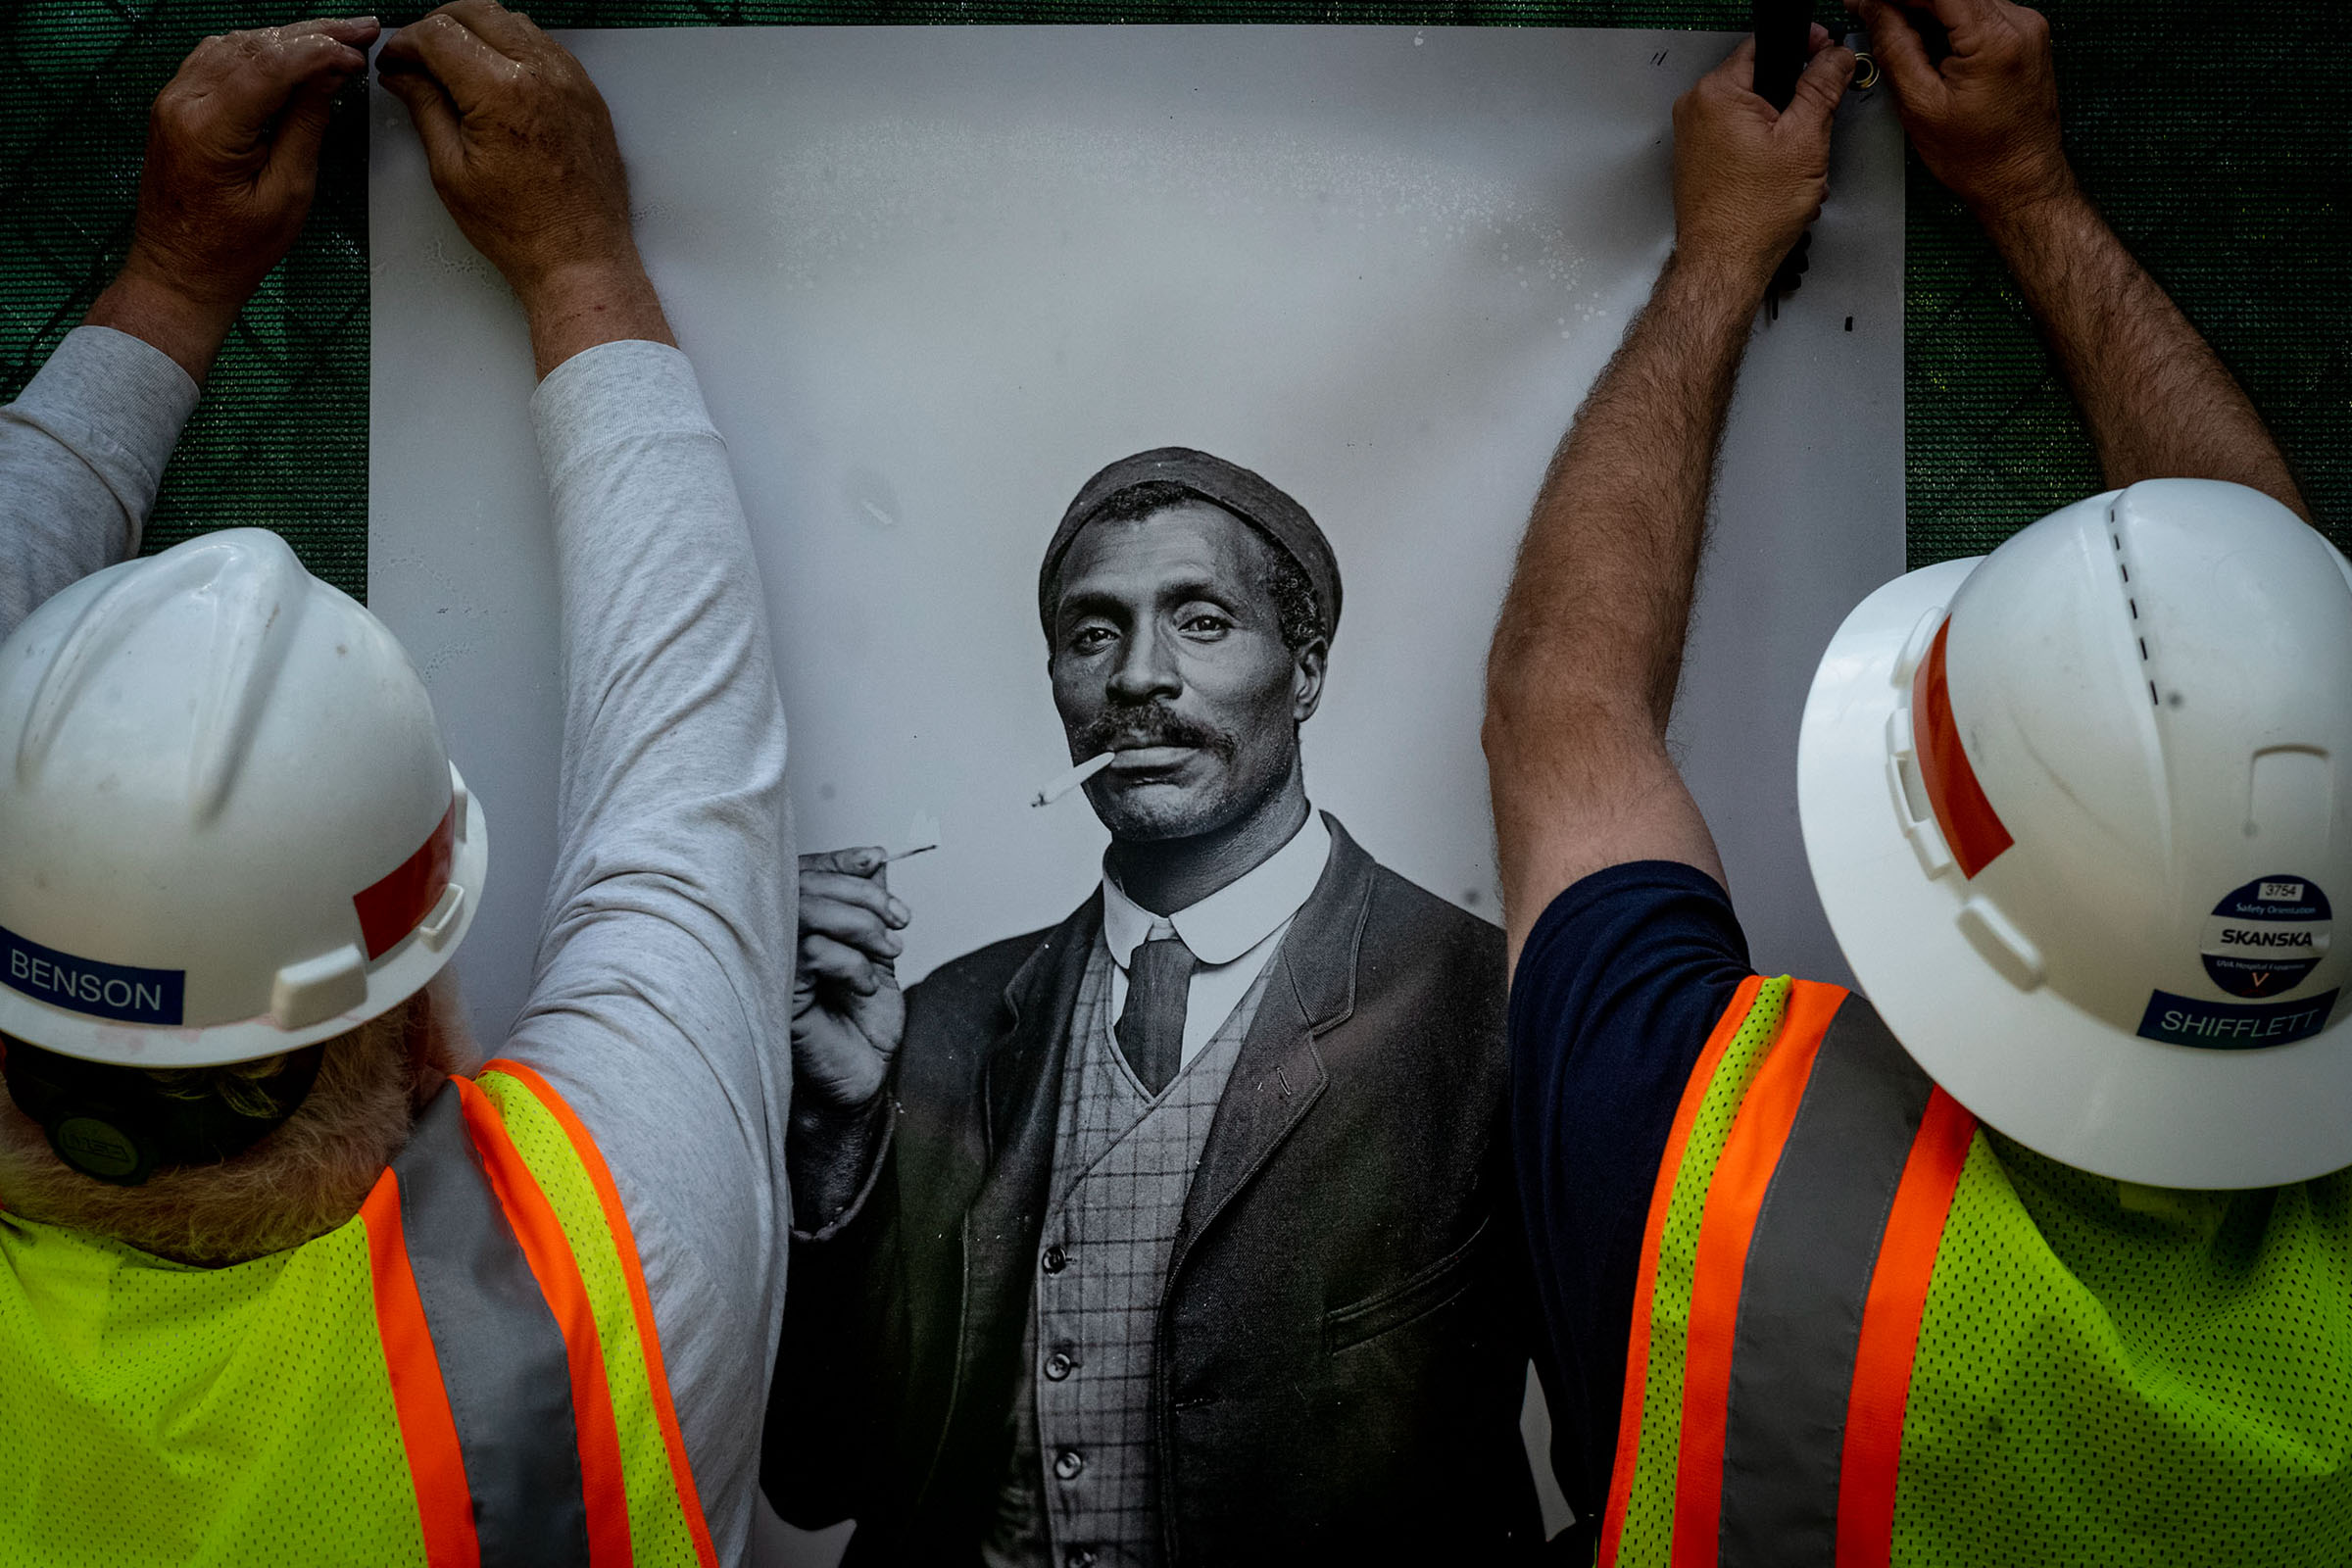 Construction worker handing up a poster of a black man dressed in a suite smoking a cigarette 